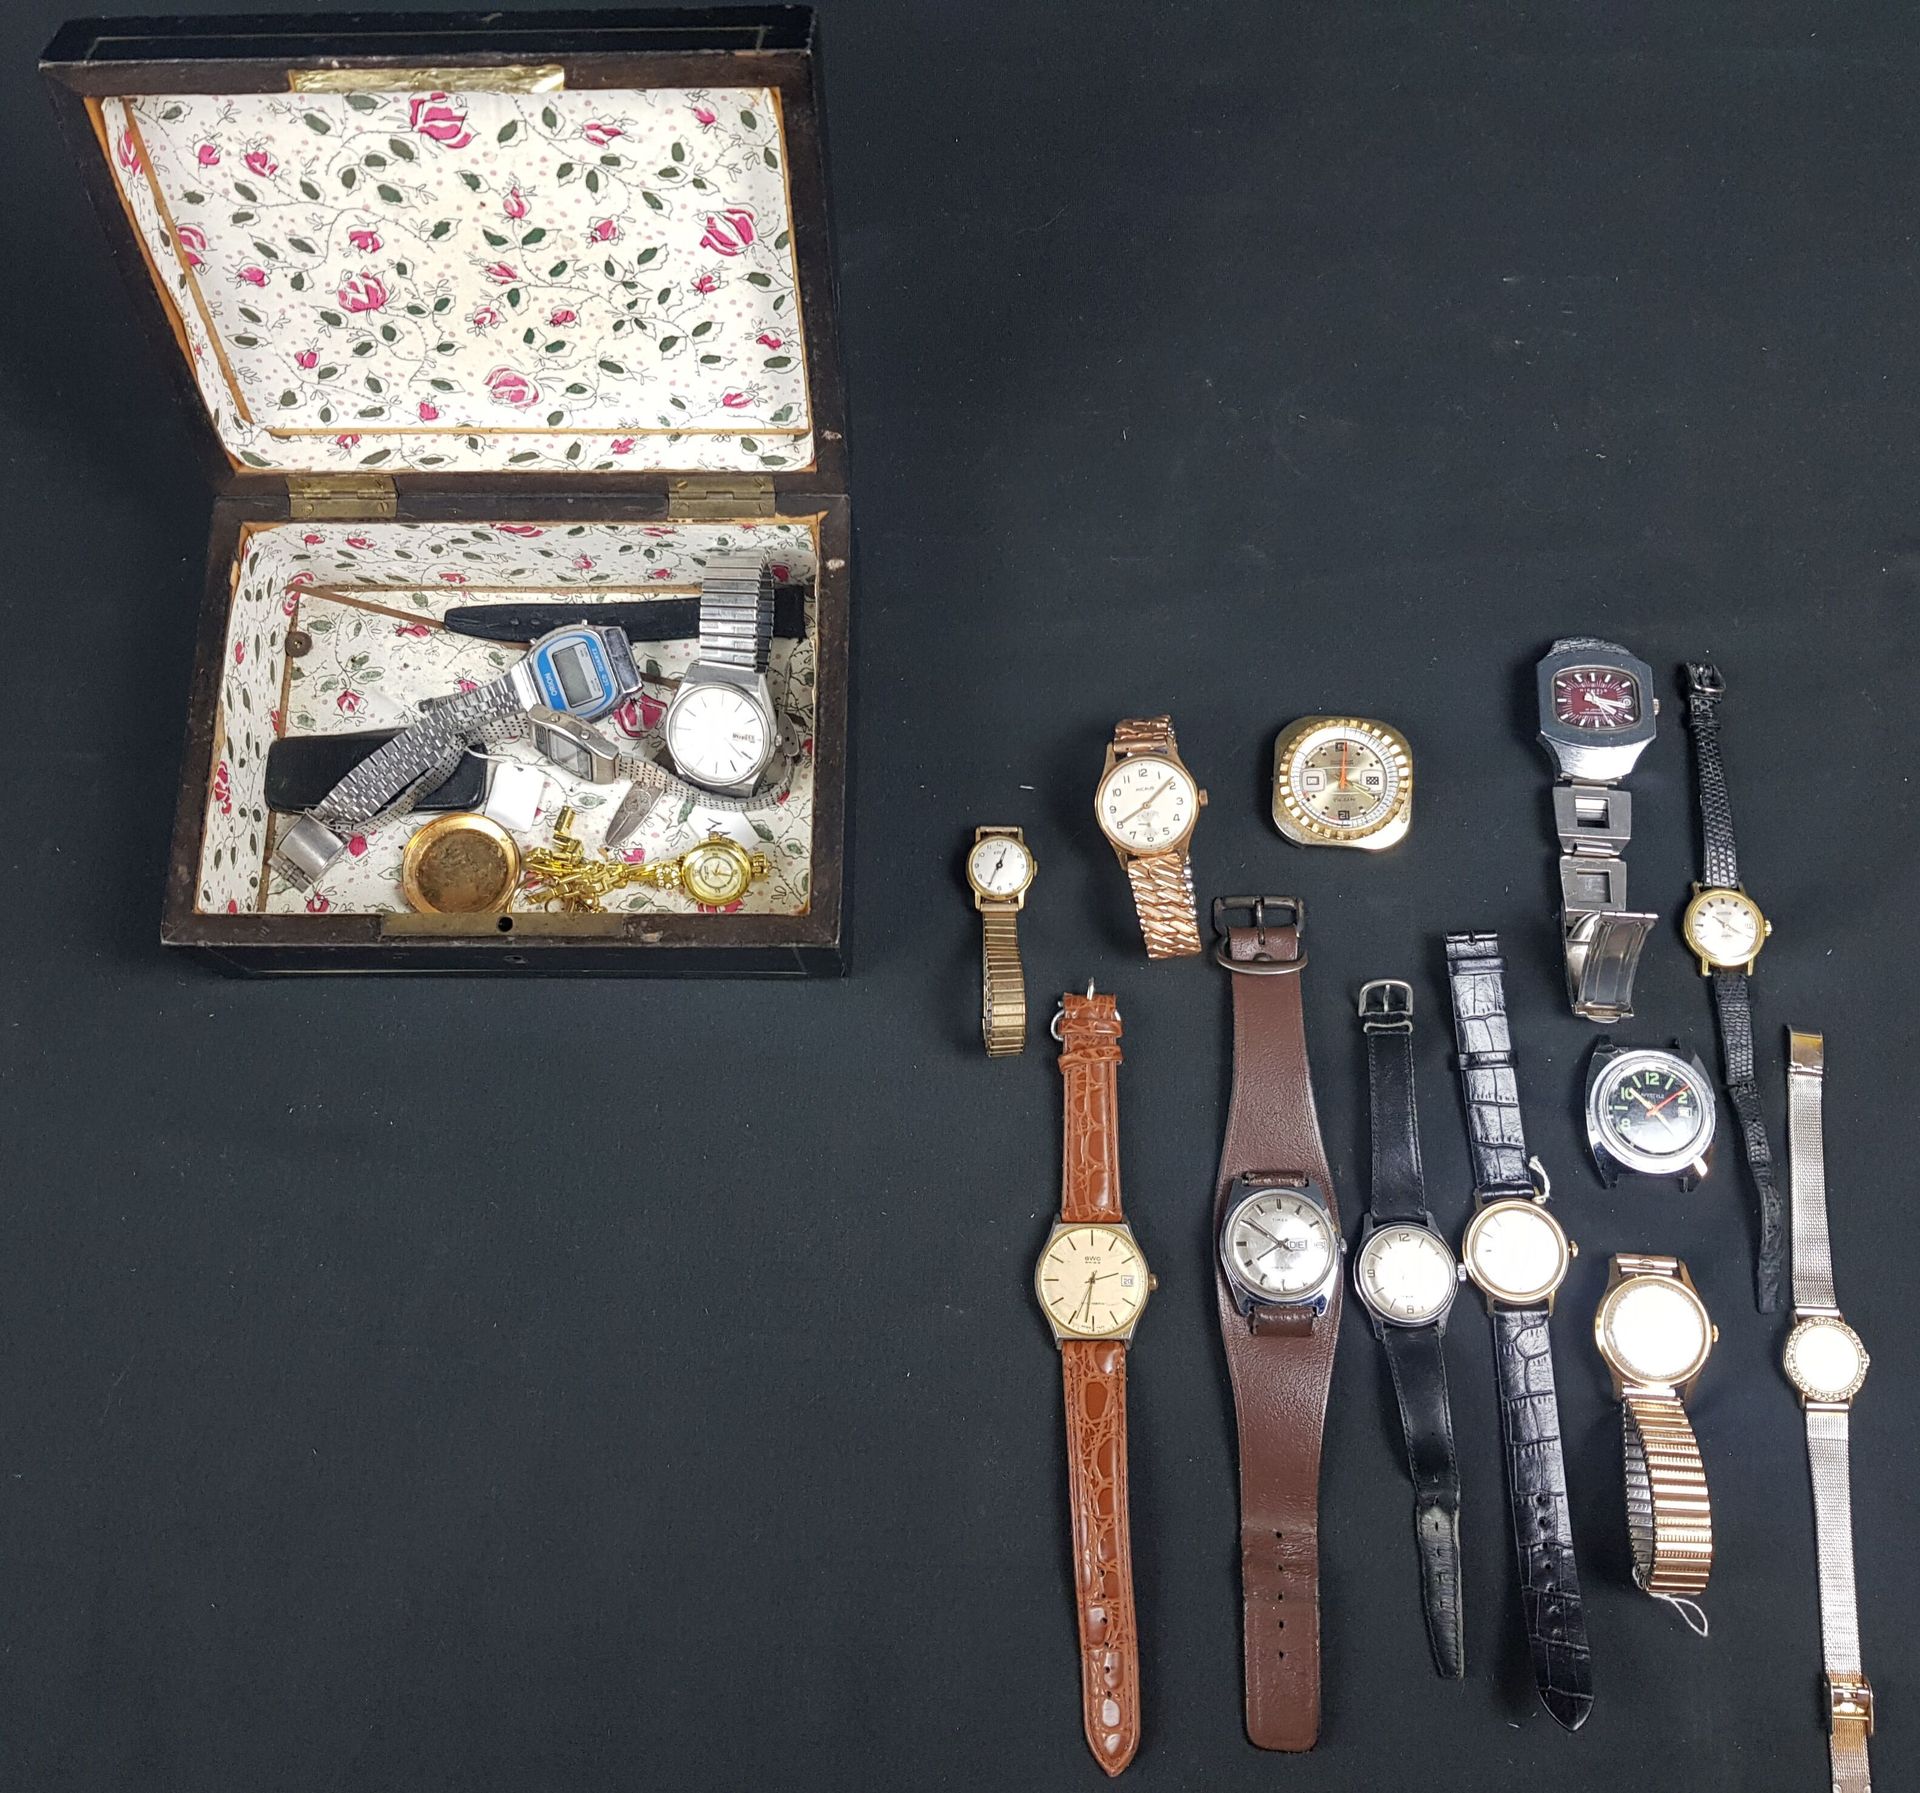 Null LOT of wristwatches including LIP, BWC, KIENZLE, etc ... - wear of use